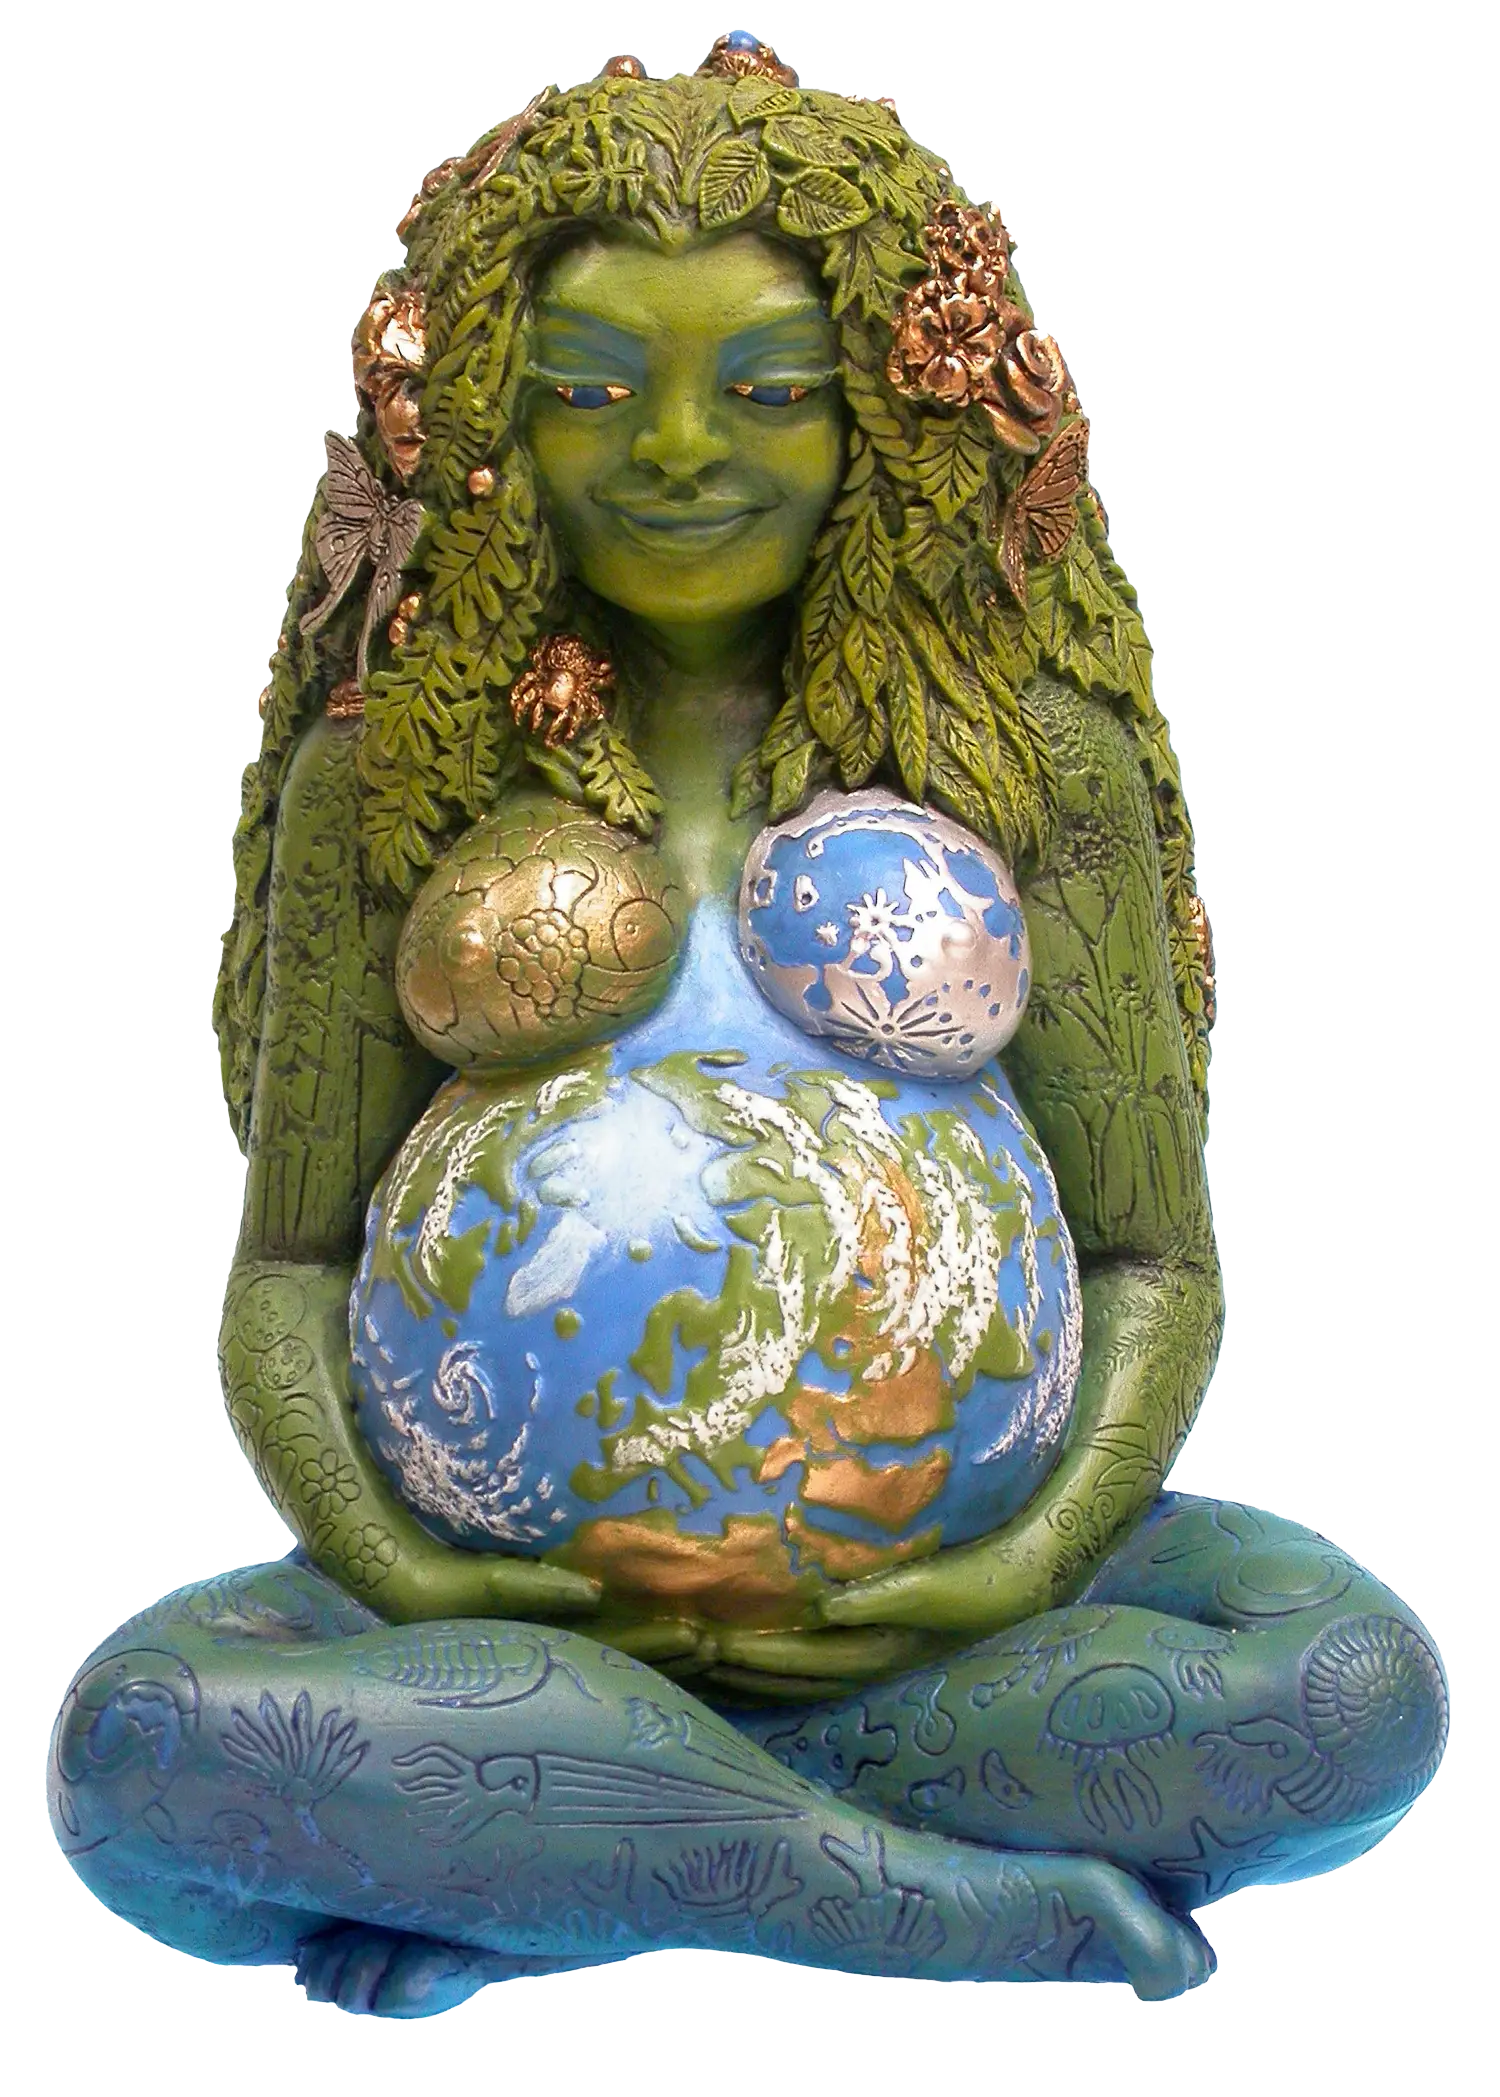 A detailed sculpture of a green-skinned woman who is cradling her belly, the Earth, in her hands. She has cascading leafy hair, and marine life is etched across her legs.